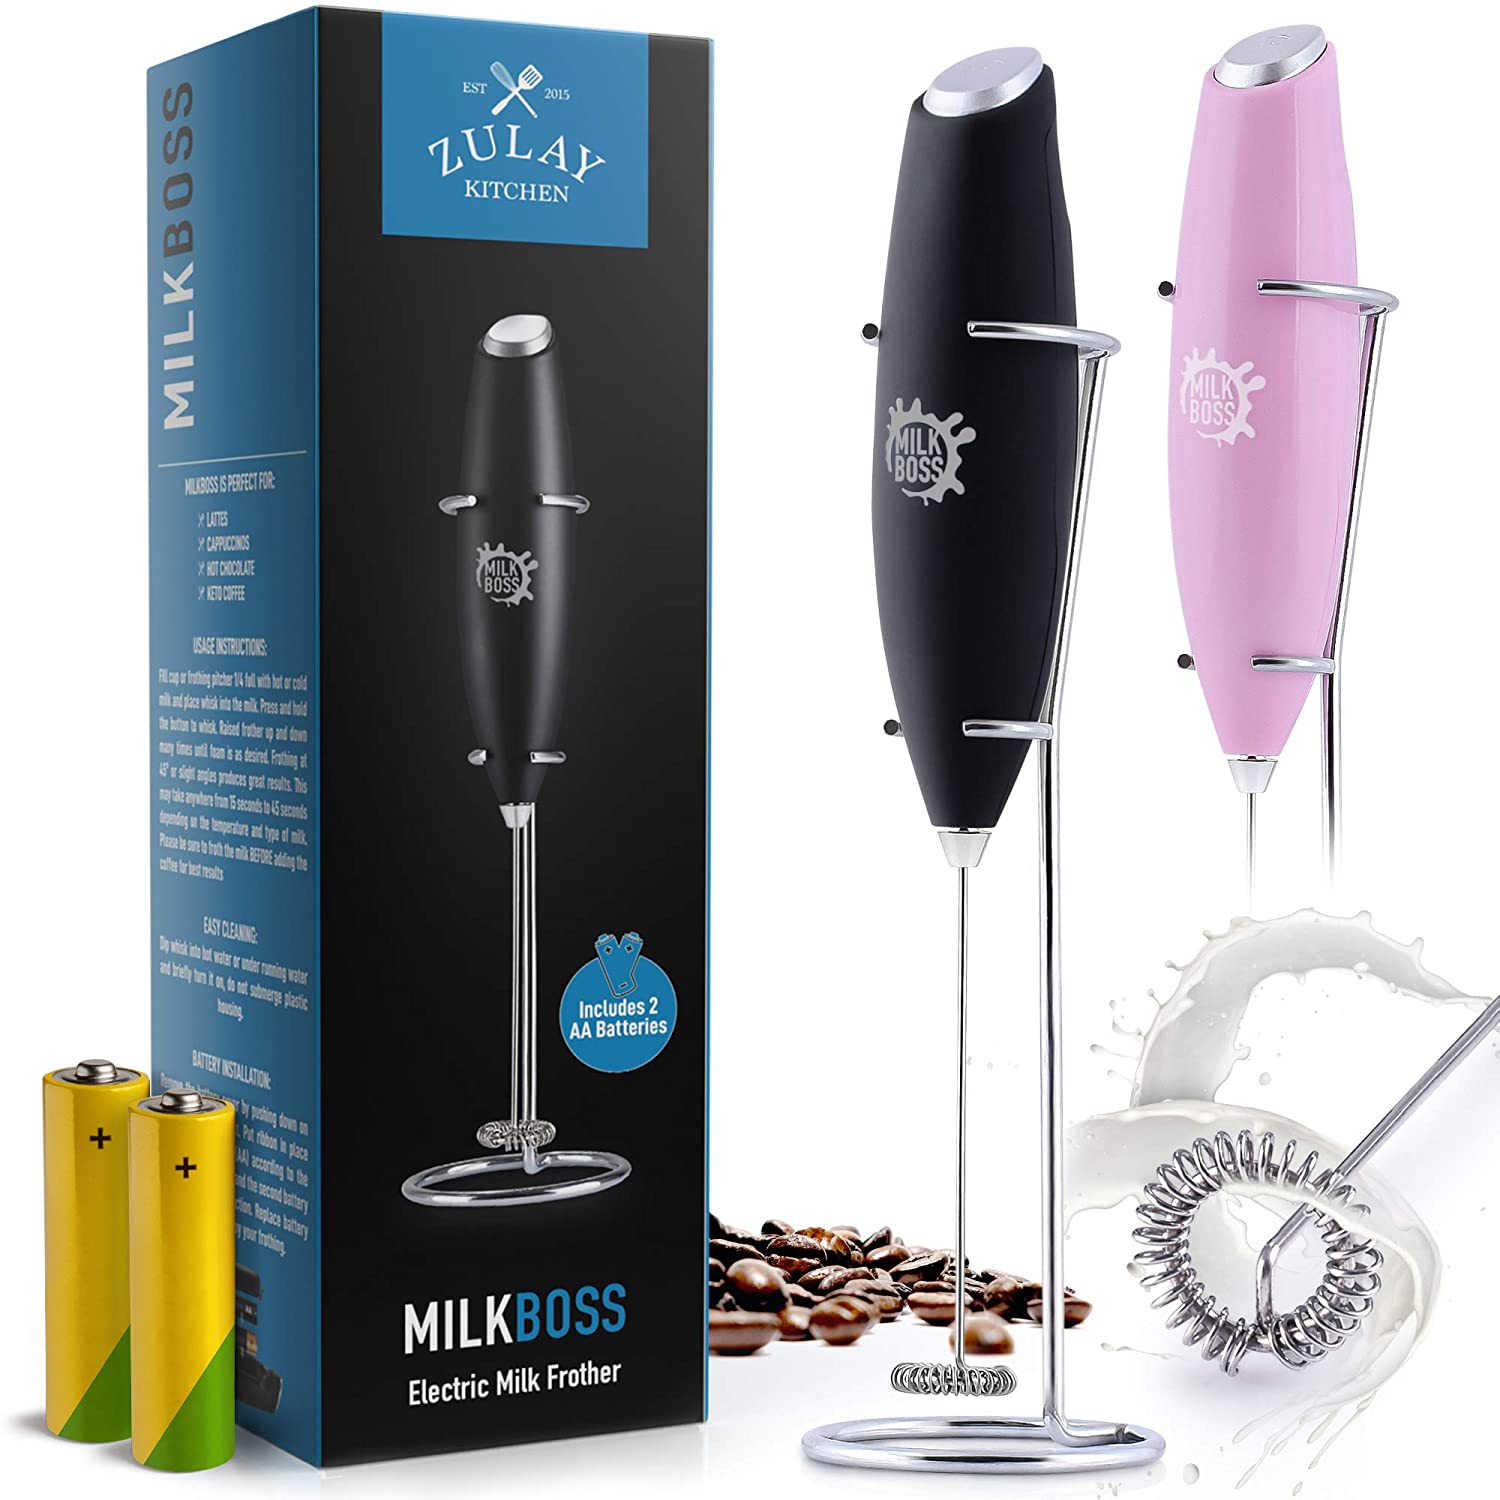 Zulay Kitchen Froth N Go Rechargeable Milk Frother - Black Online